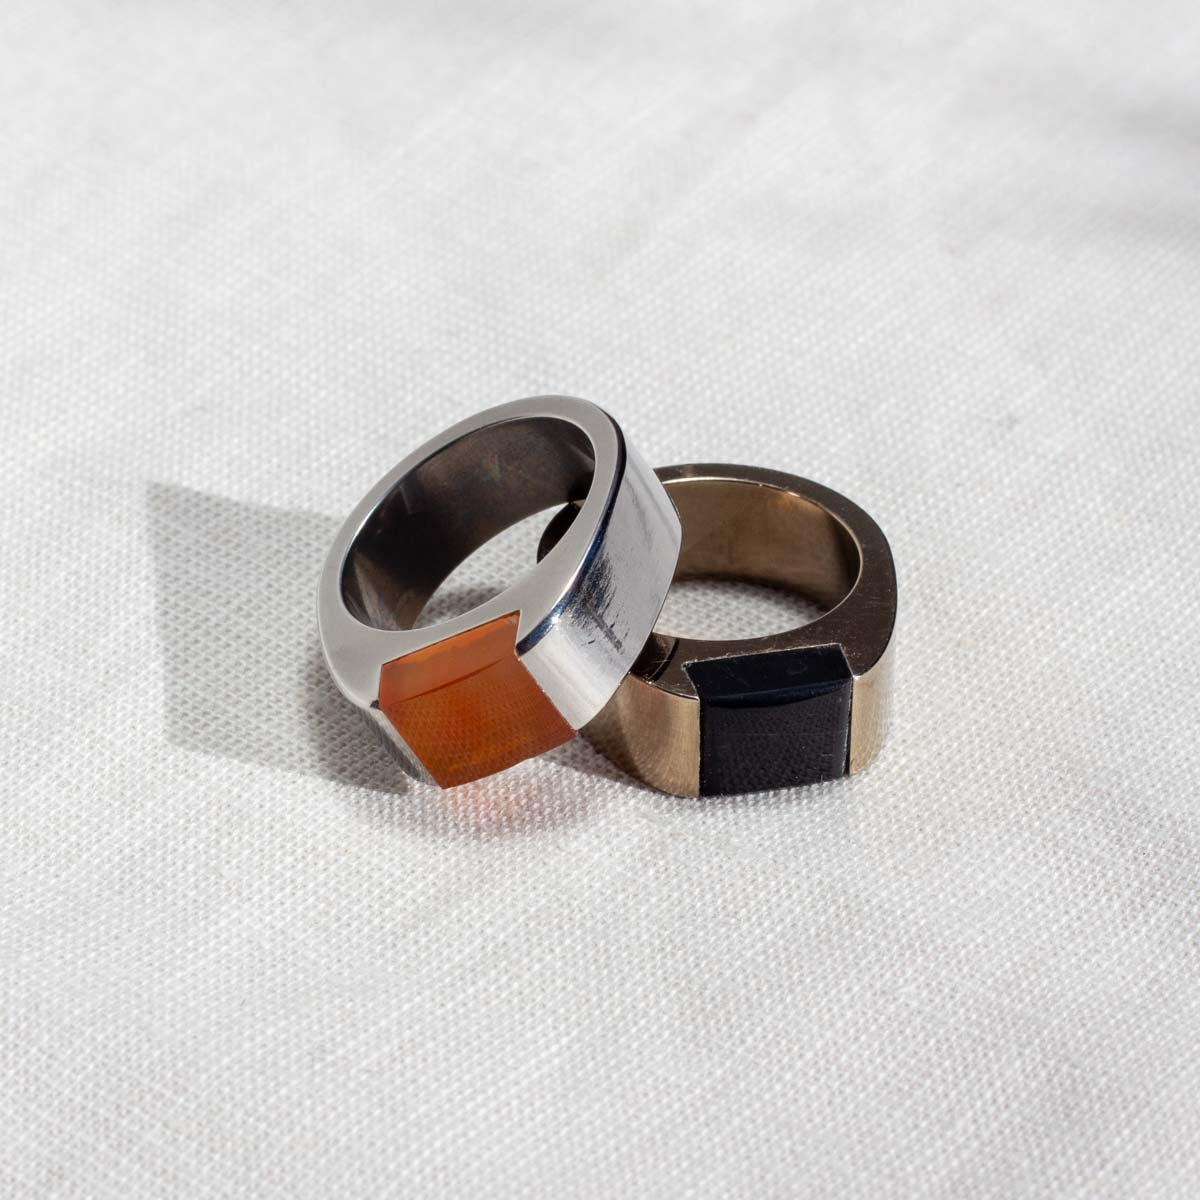 Two custom mens rings - one with a silver finish and one with a champagne finish